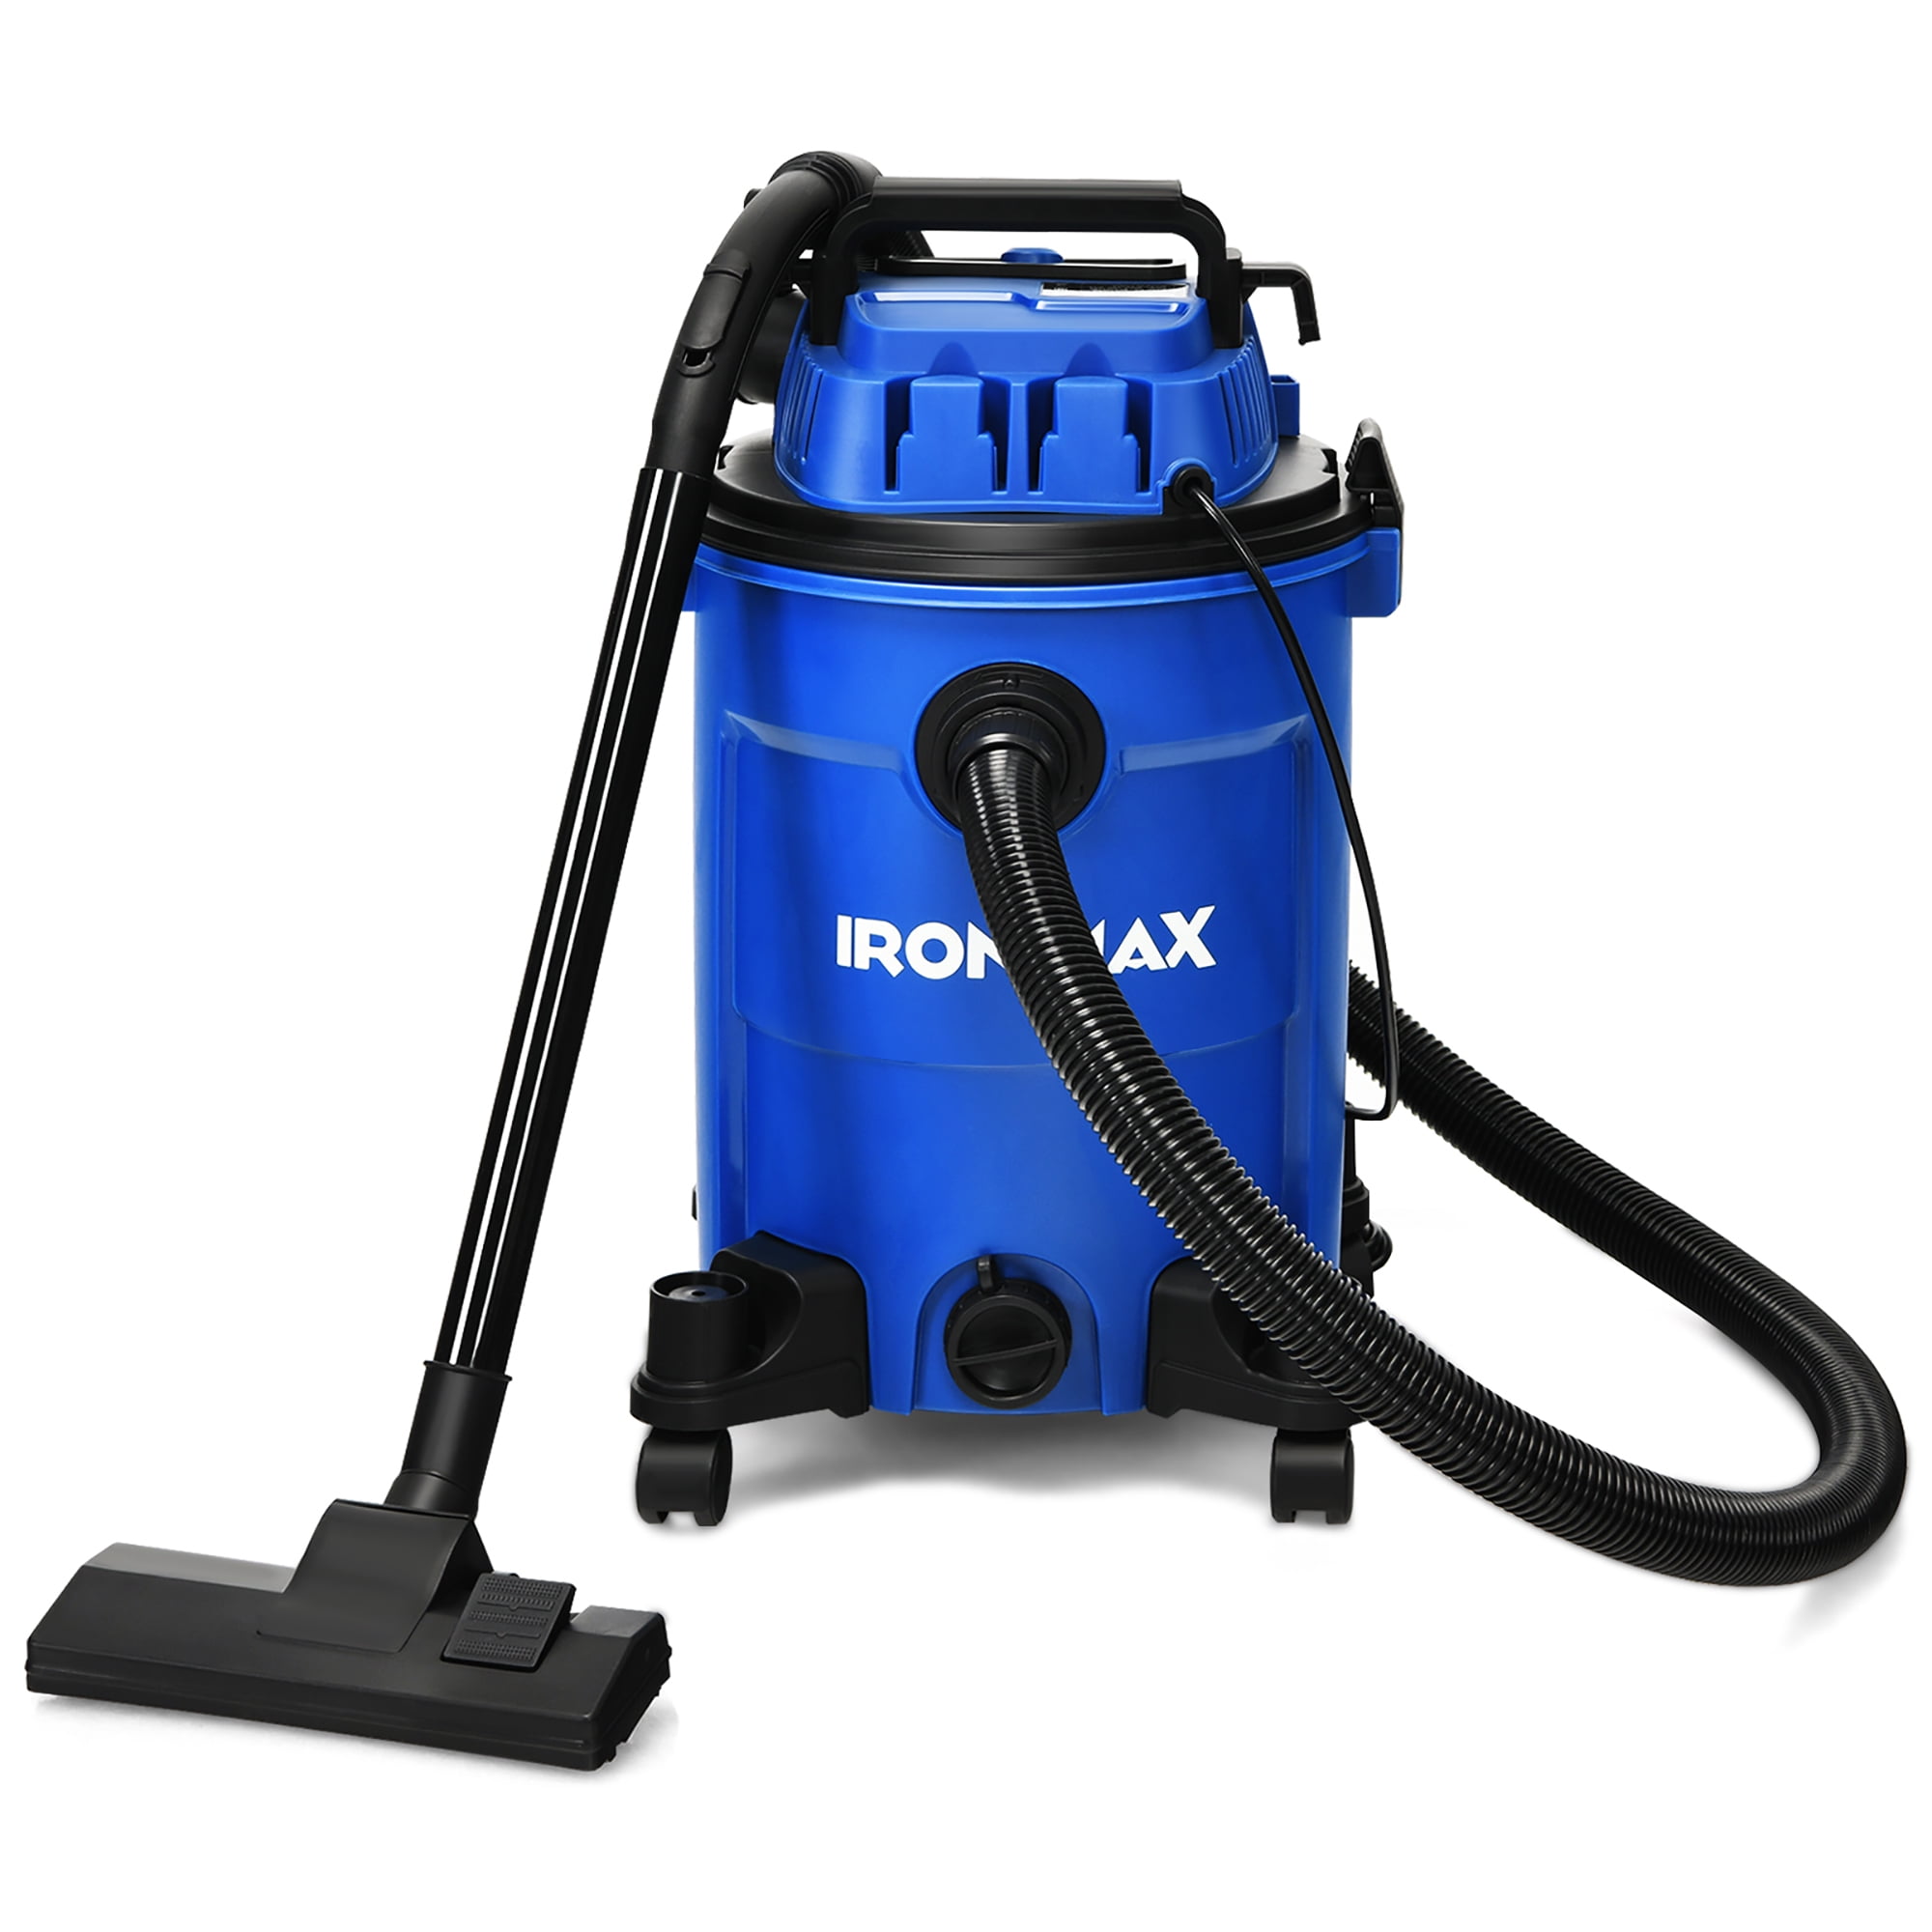 Shop-Vac 8 Gallon 4.0-Peak HP WetDry Vacuum, 3 in 1 Function with Filter, Hose and Accessories, Ideal for Jobsite, Garage, Car & Workshop. 5971836